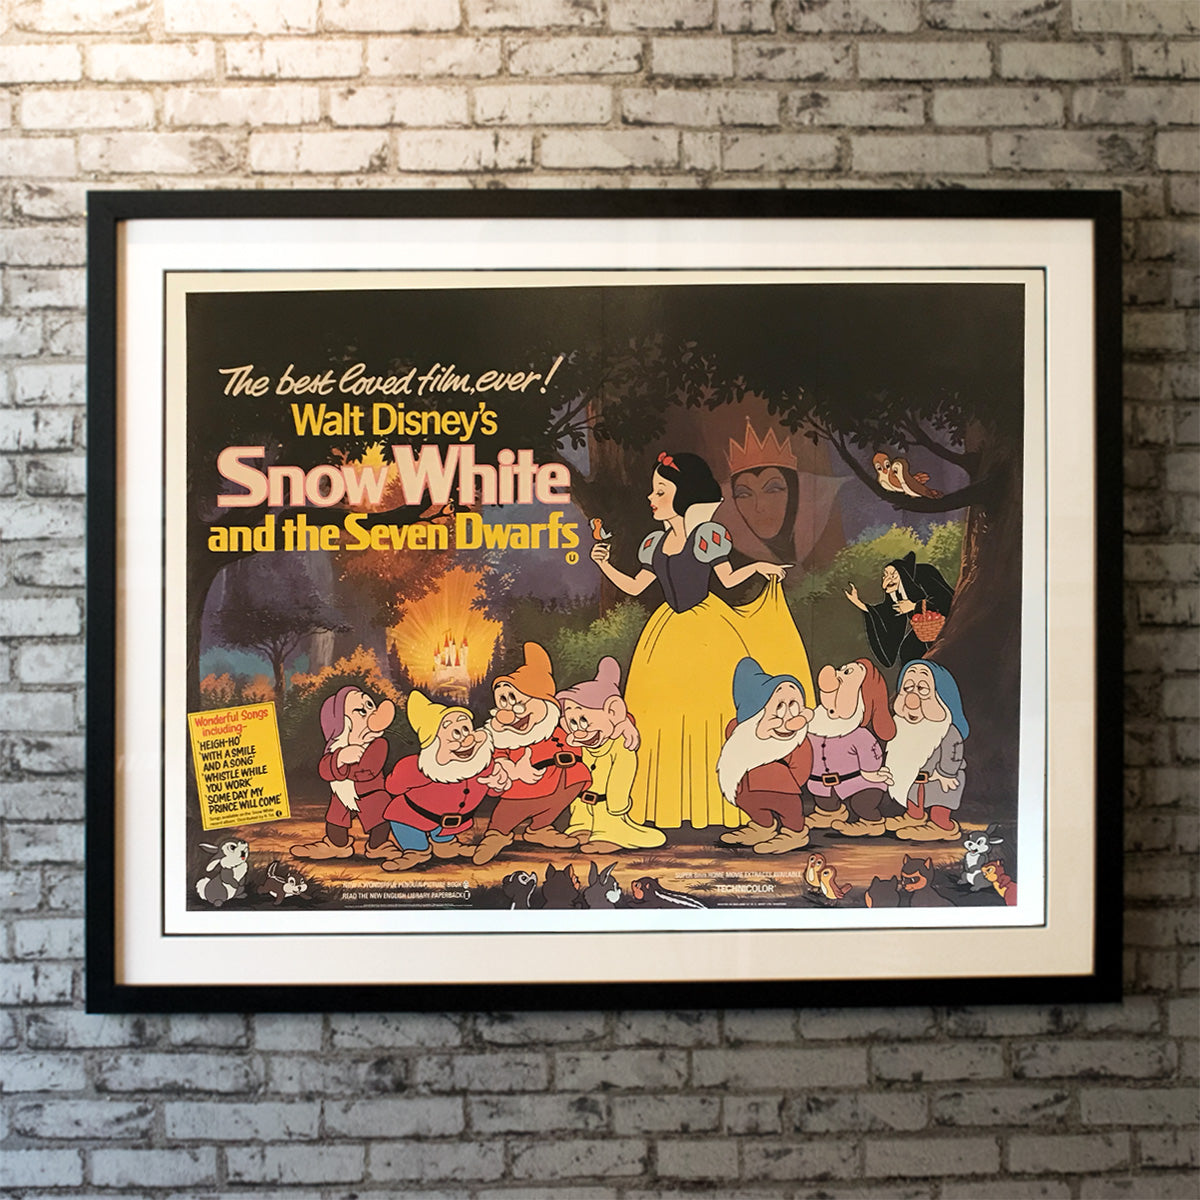 Snow White and The Seven Dwarfs (R1980)